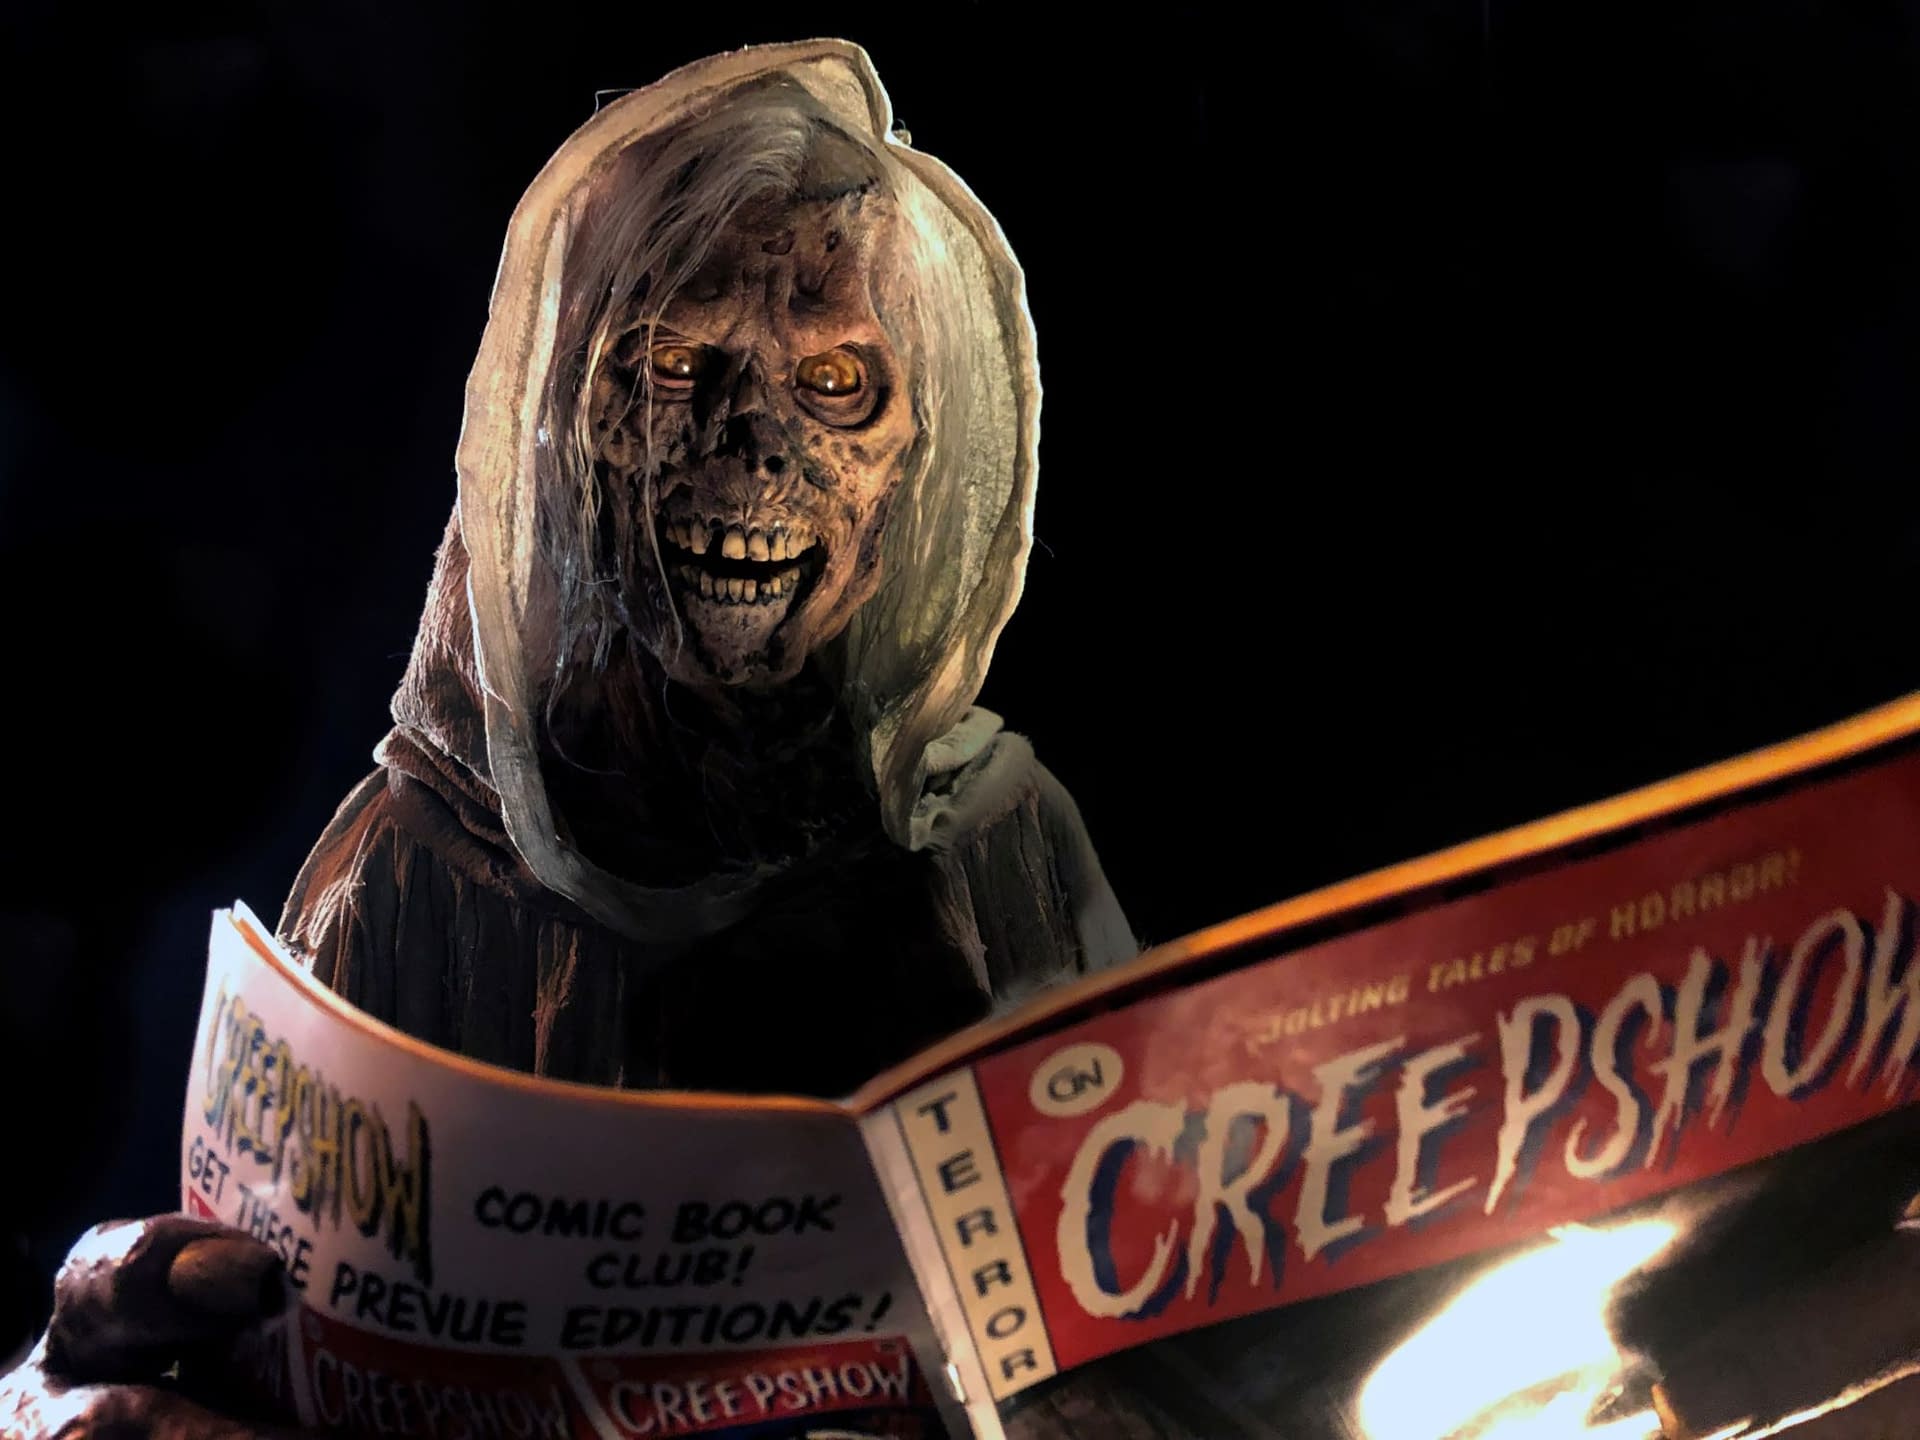 "Creepshow" Offers Fresh Look at Things "That Will Drive You Insane" [OFFICIAL TRAILER #2]